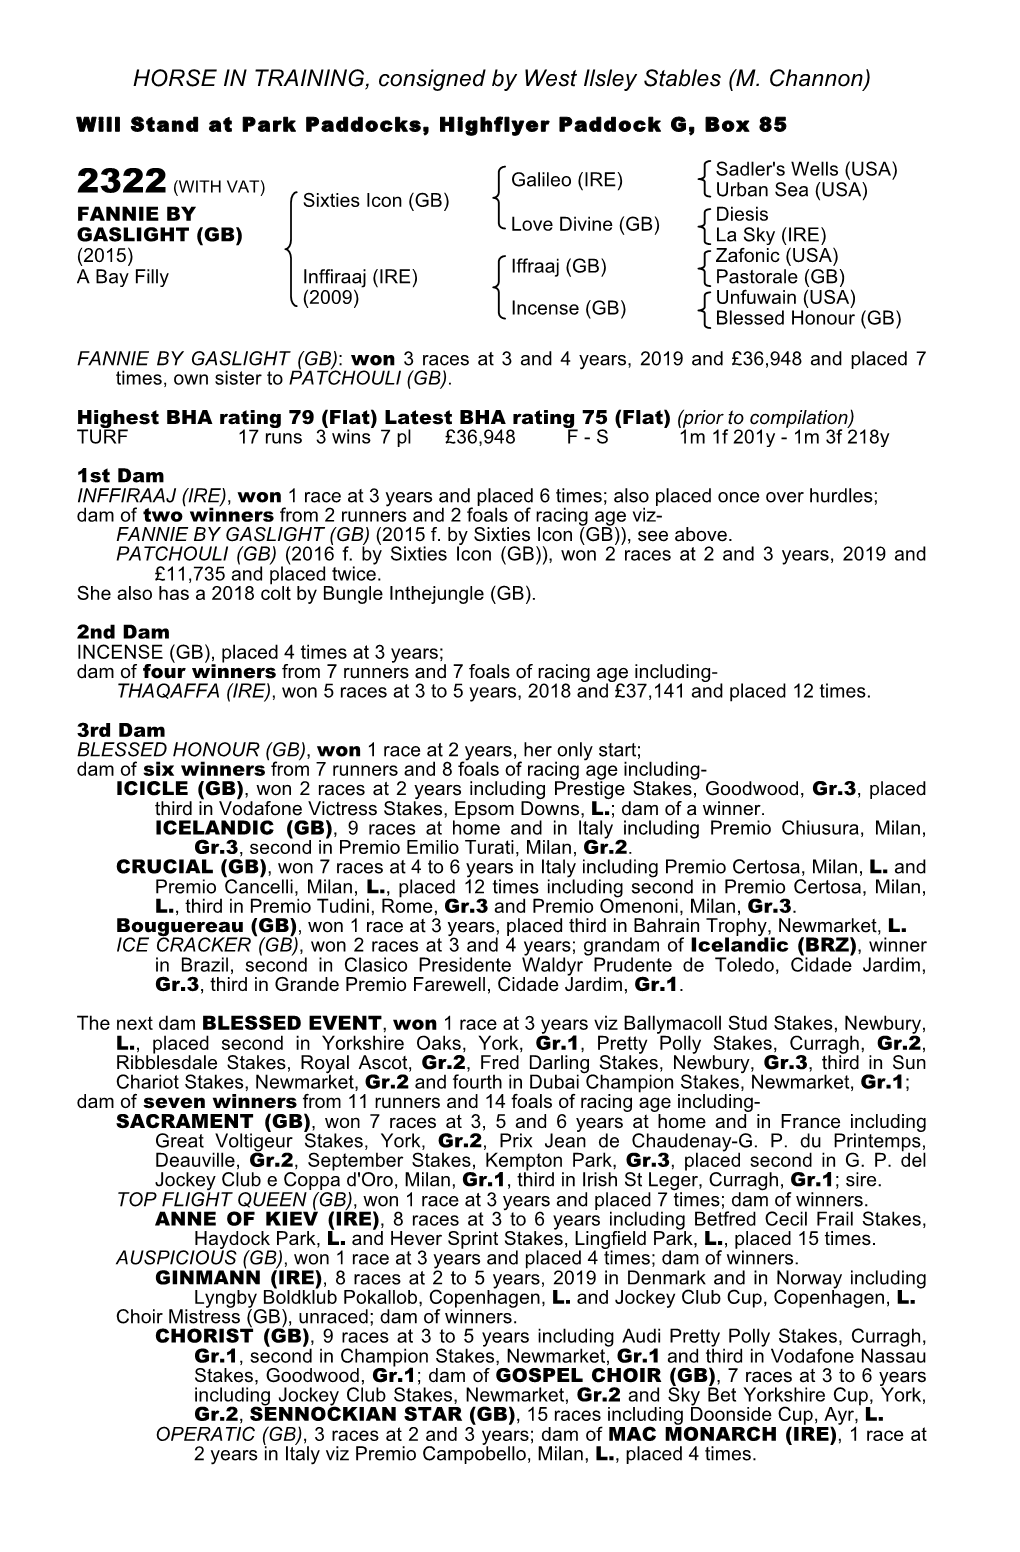 HORSE in TRAINING, Consigned by West Ilsley Stables (M. Channon)